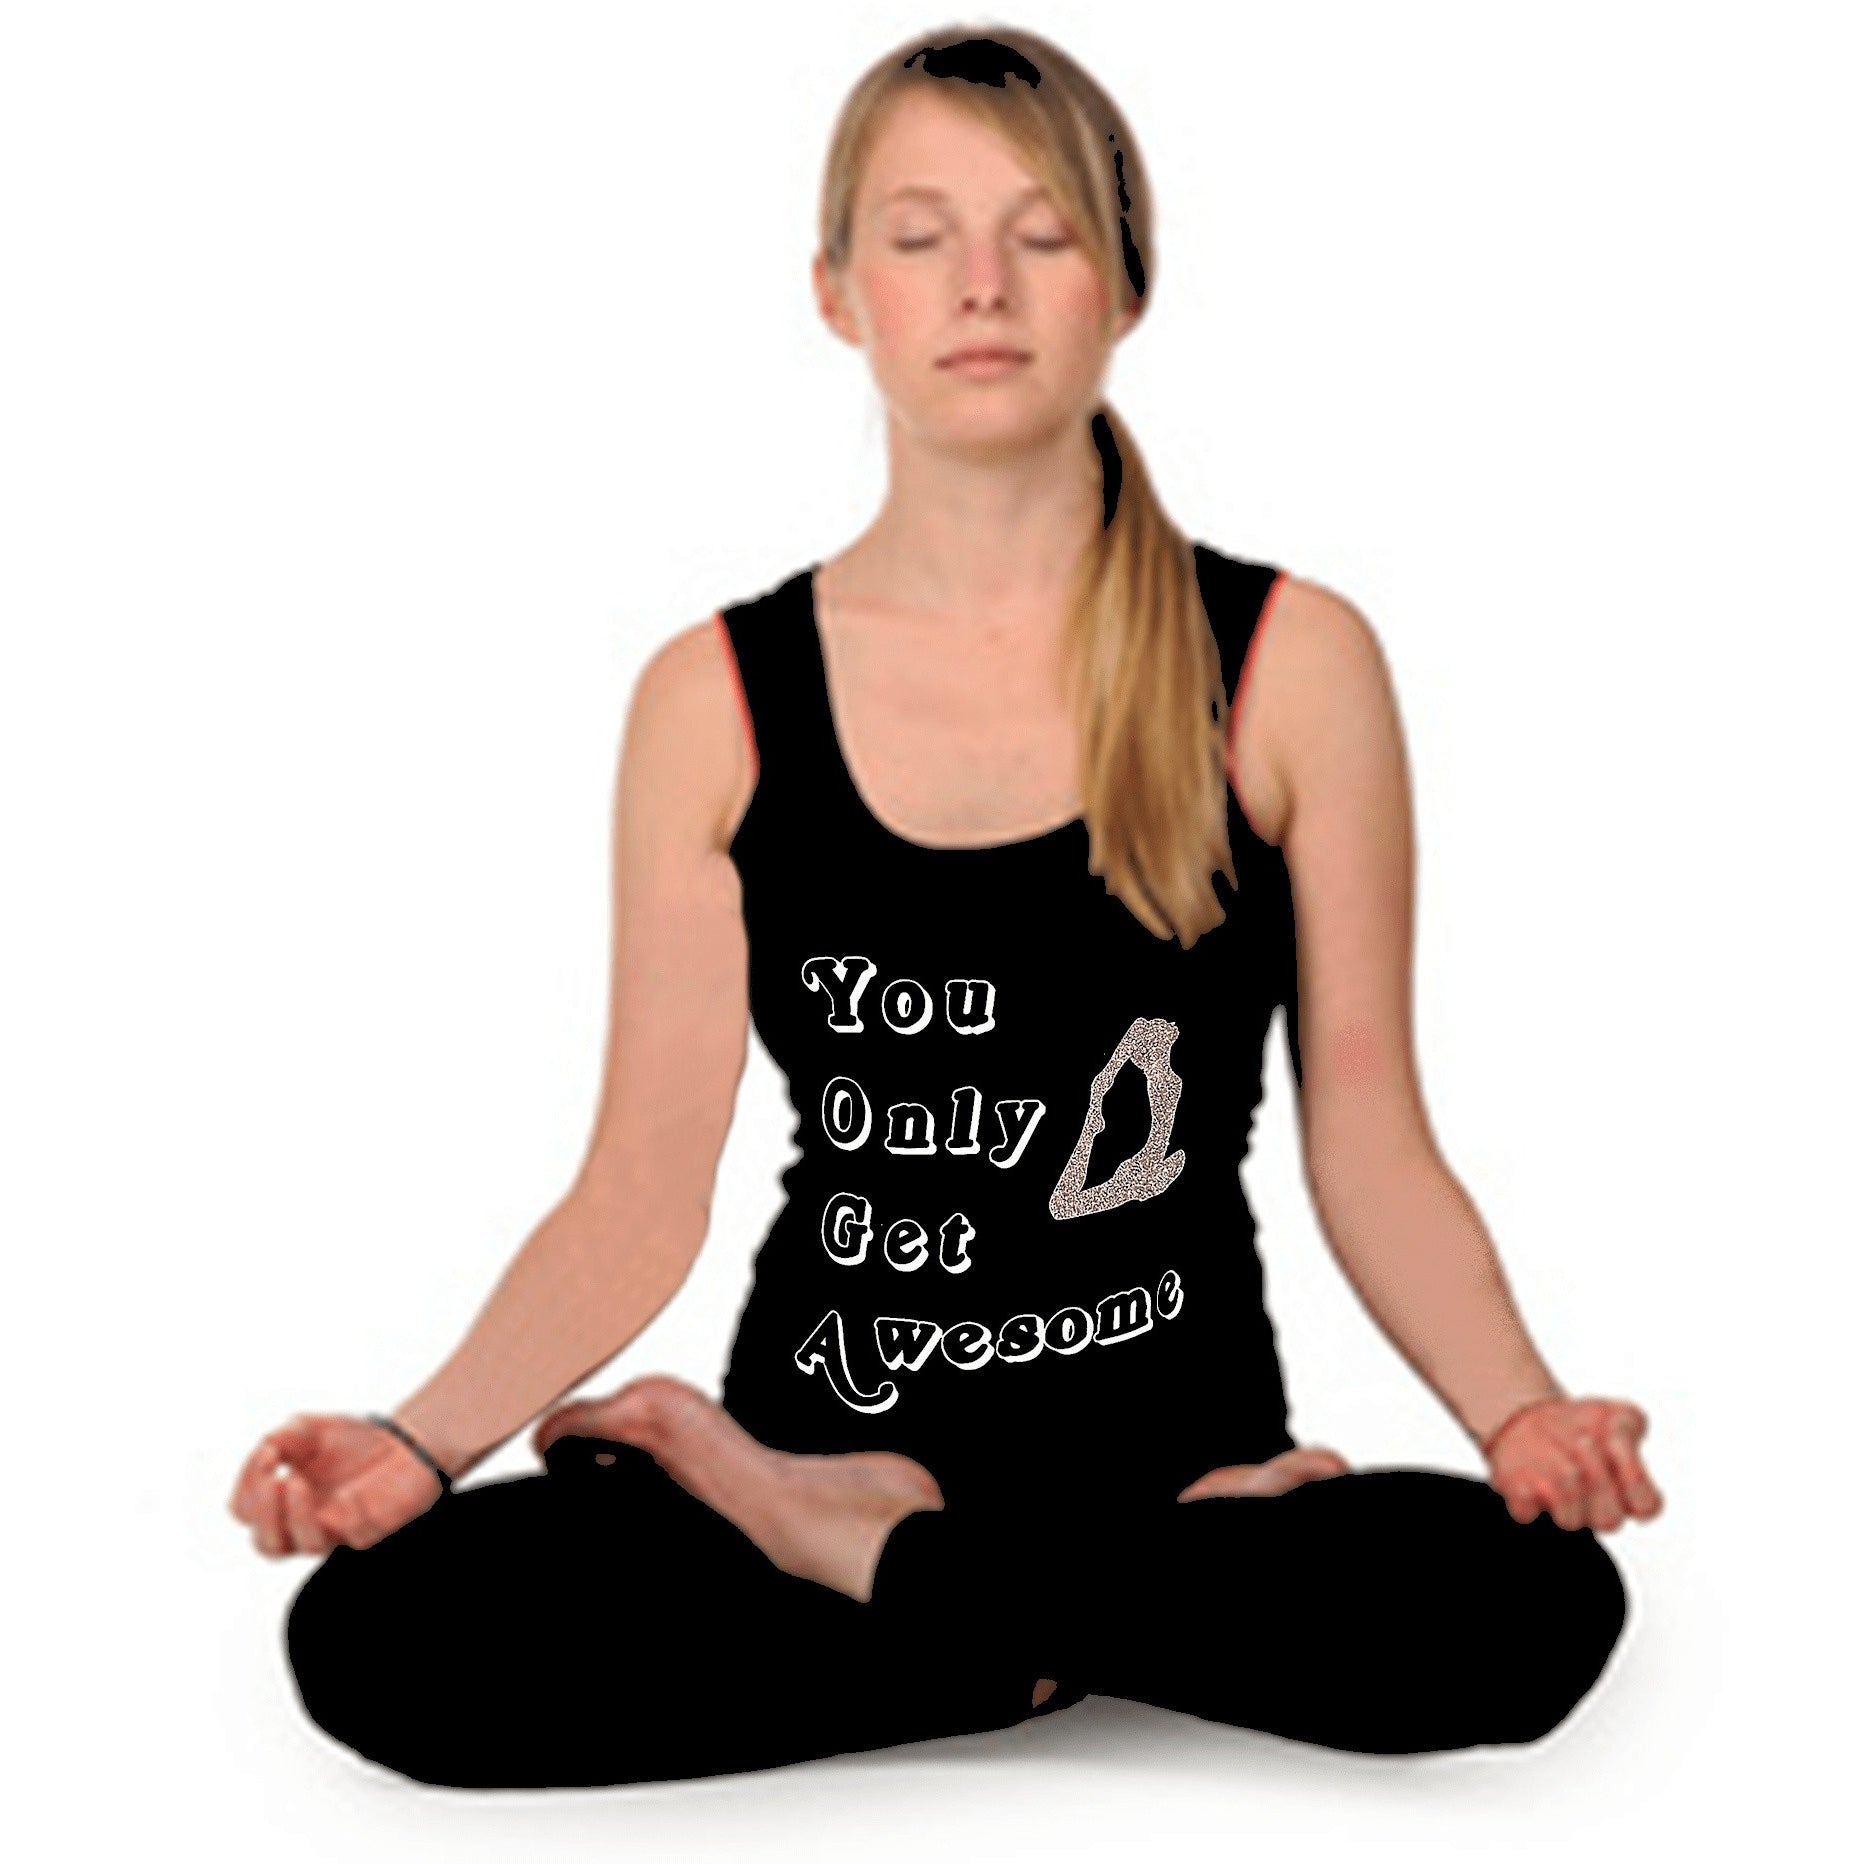 YOGA You Only Get Awesome Tank Top